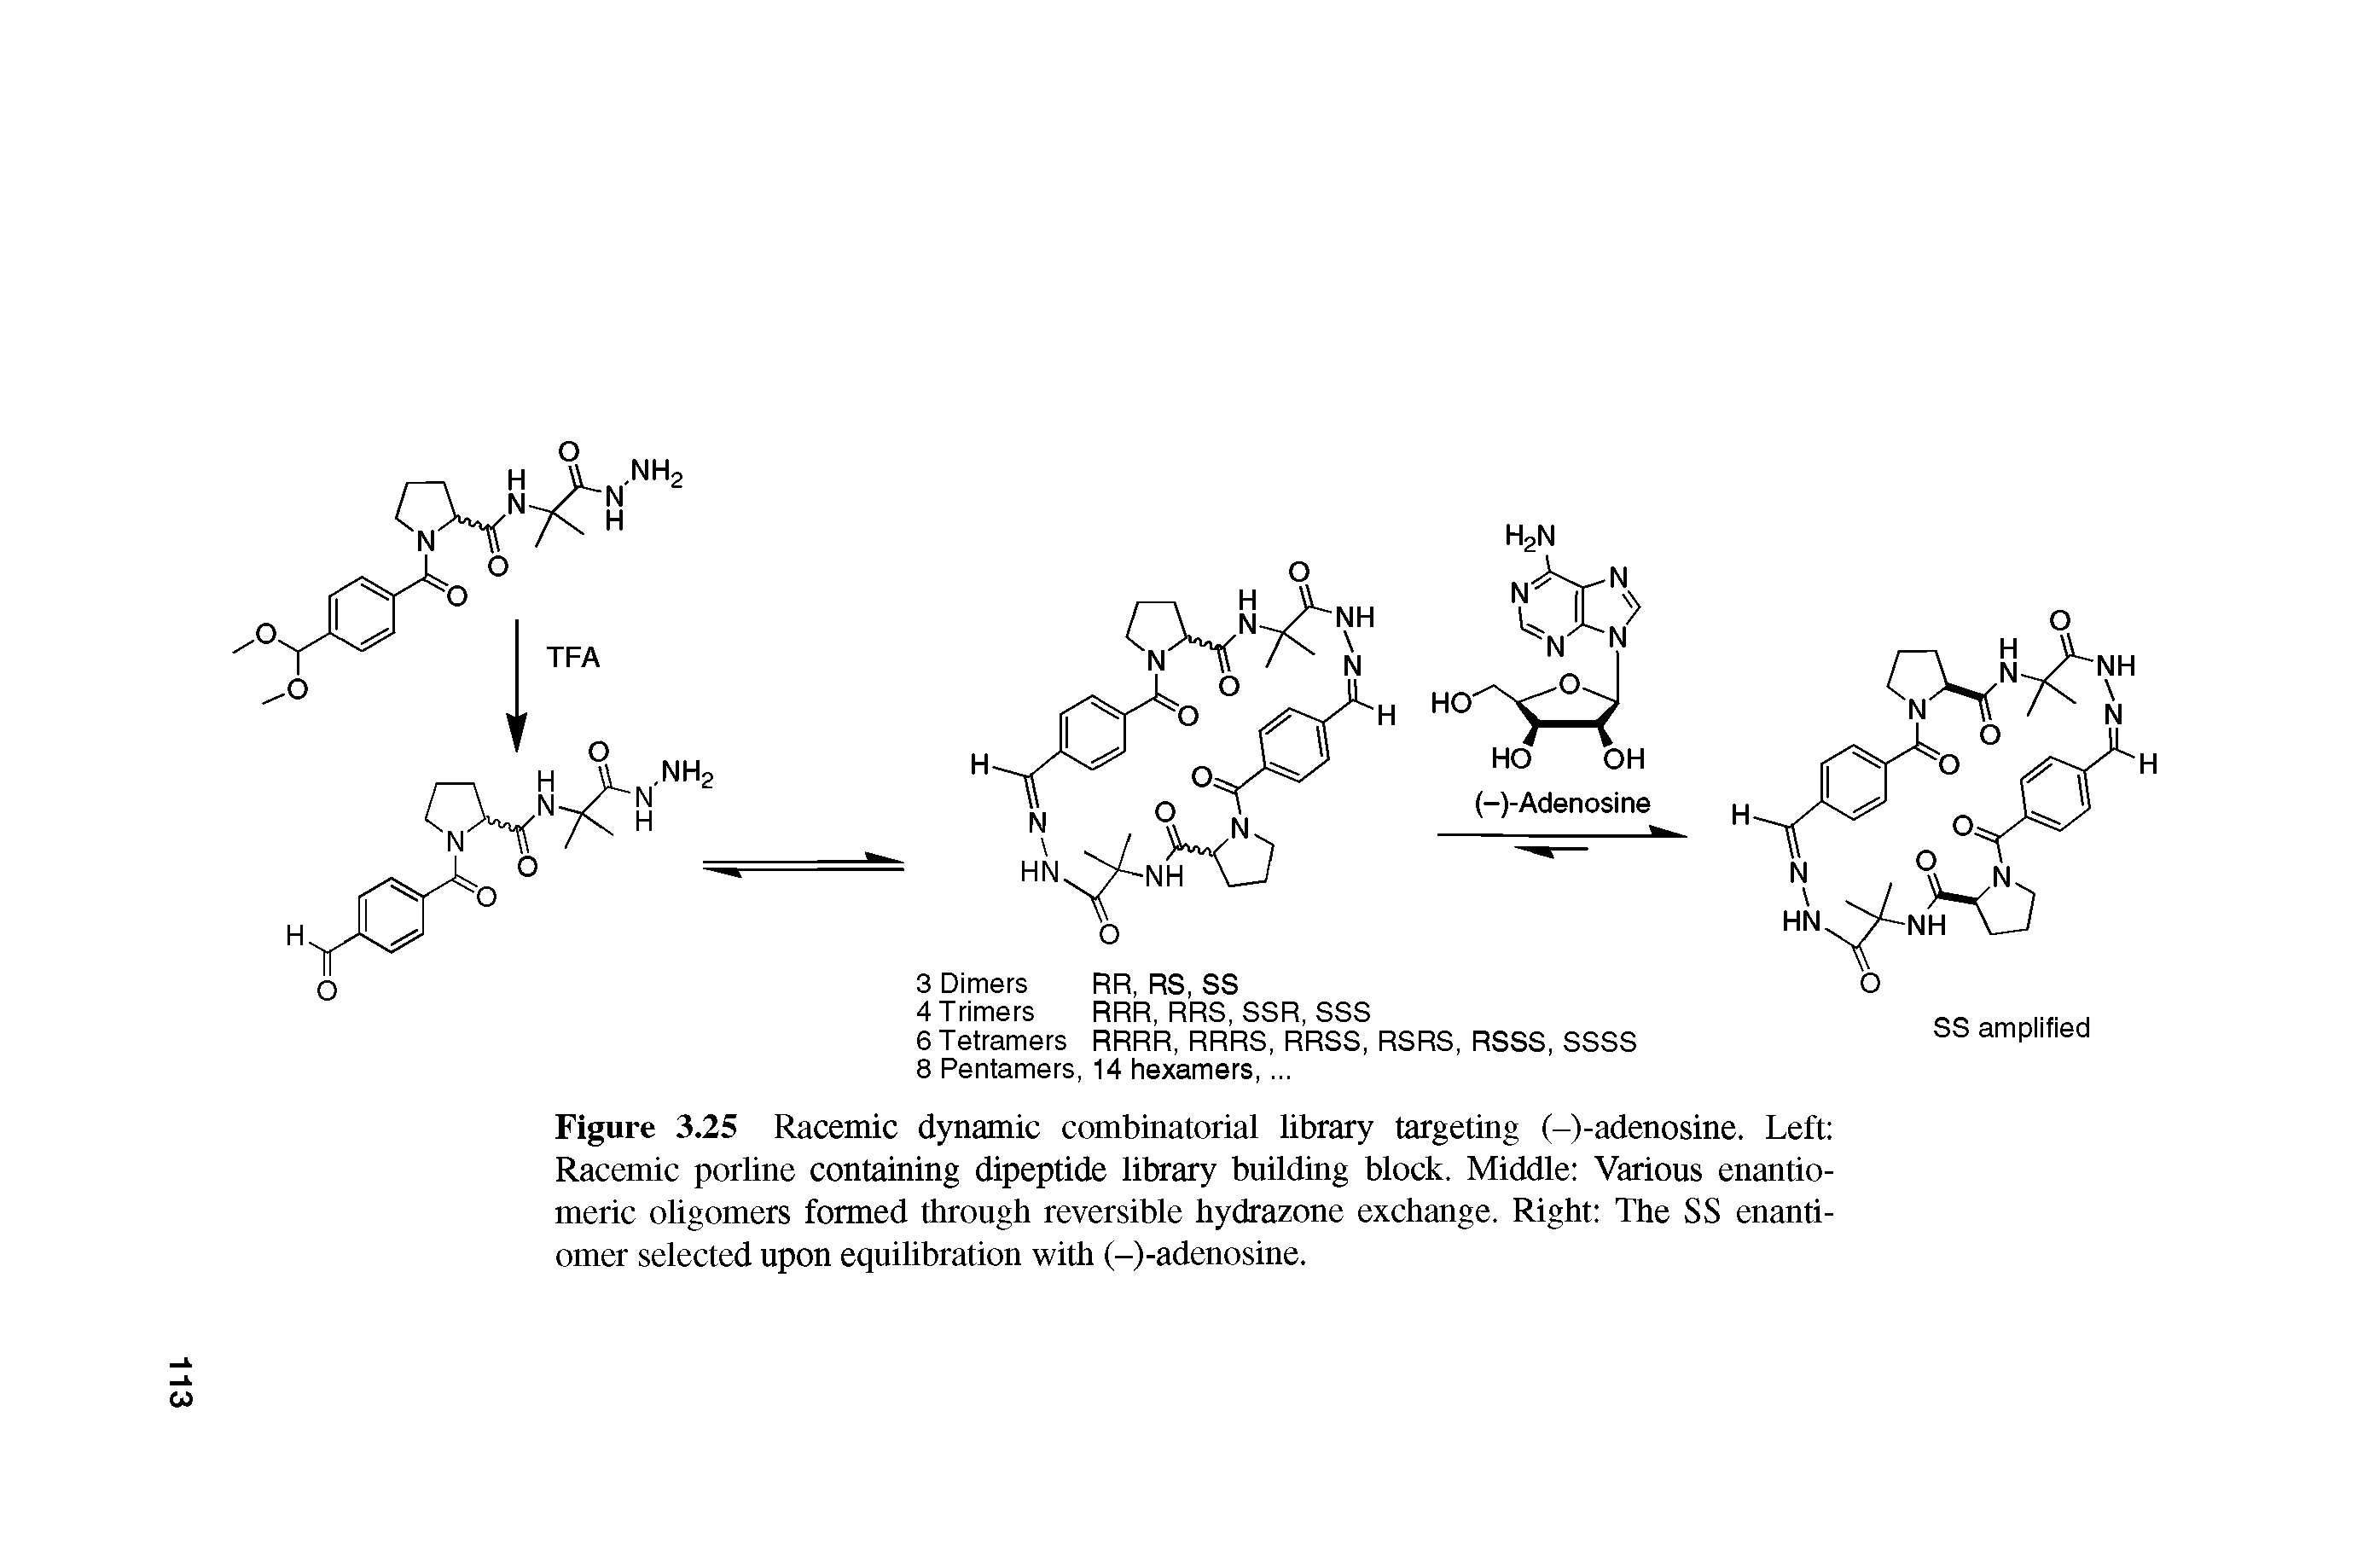 Figure 3.25 Racemic dynamic combinatorial library targeting (-)-adenosine. Left Racemic porline containing dipeptide library building block. Middle Various enantiomeric oligomers formed through reversible hydrazone exchange. Right The SS enantiomer selected upon equilibration with (-)-adenosine.